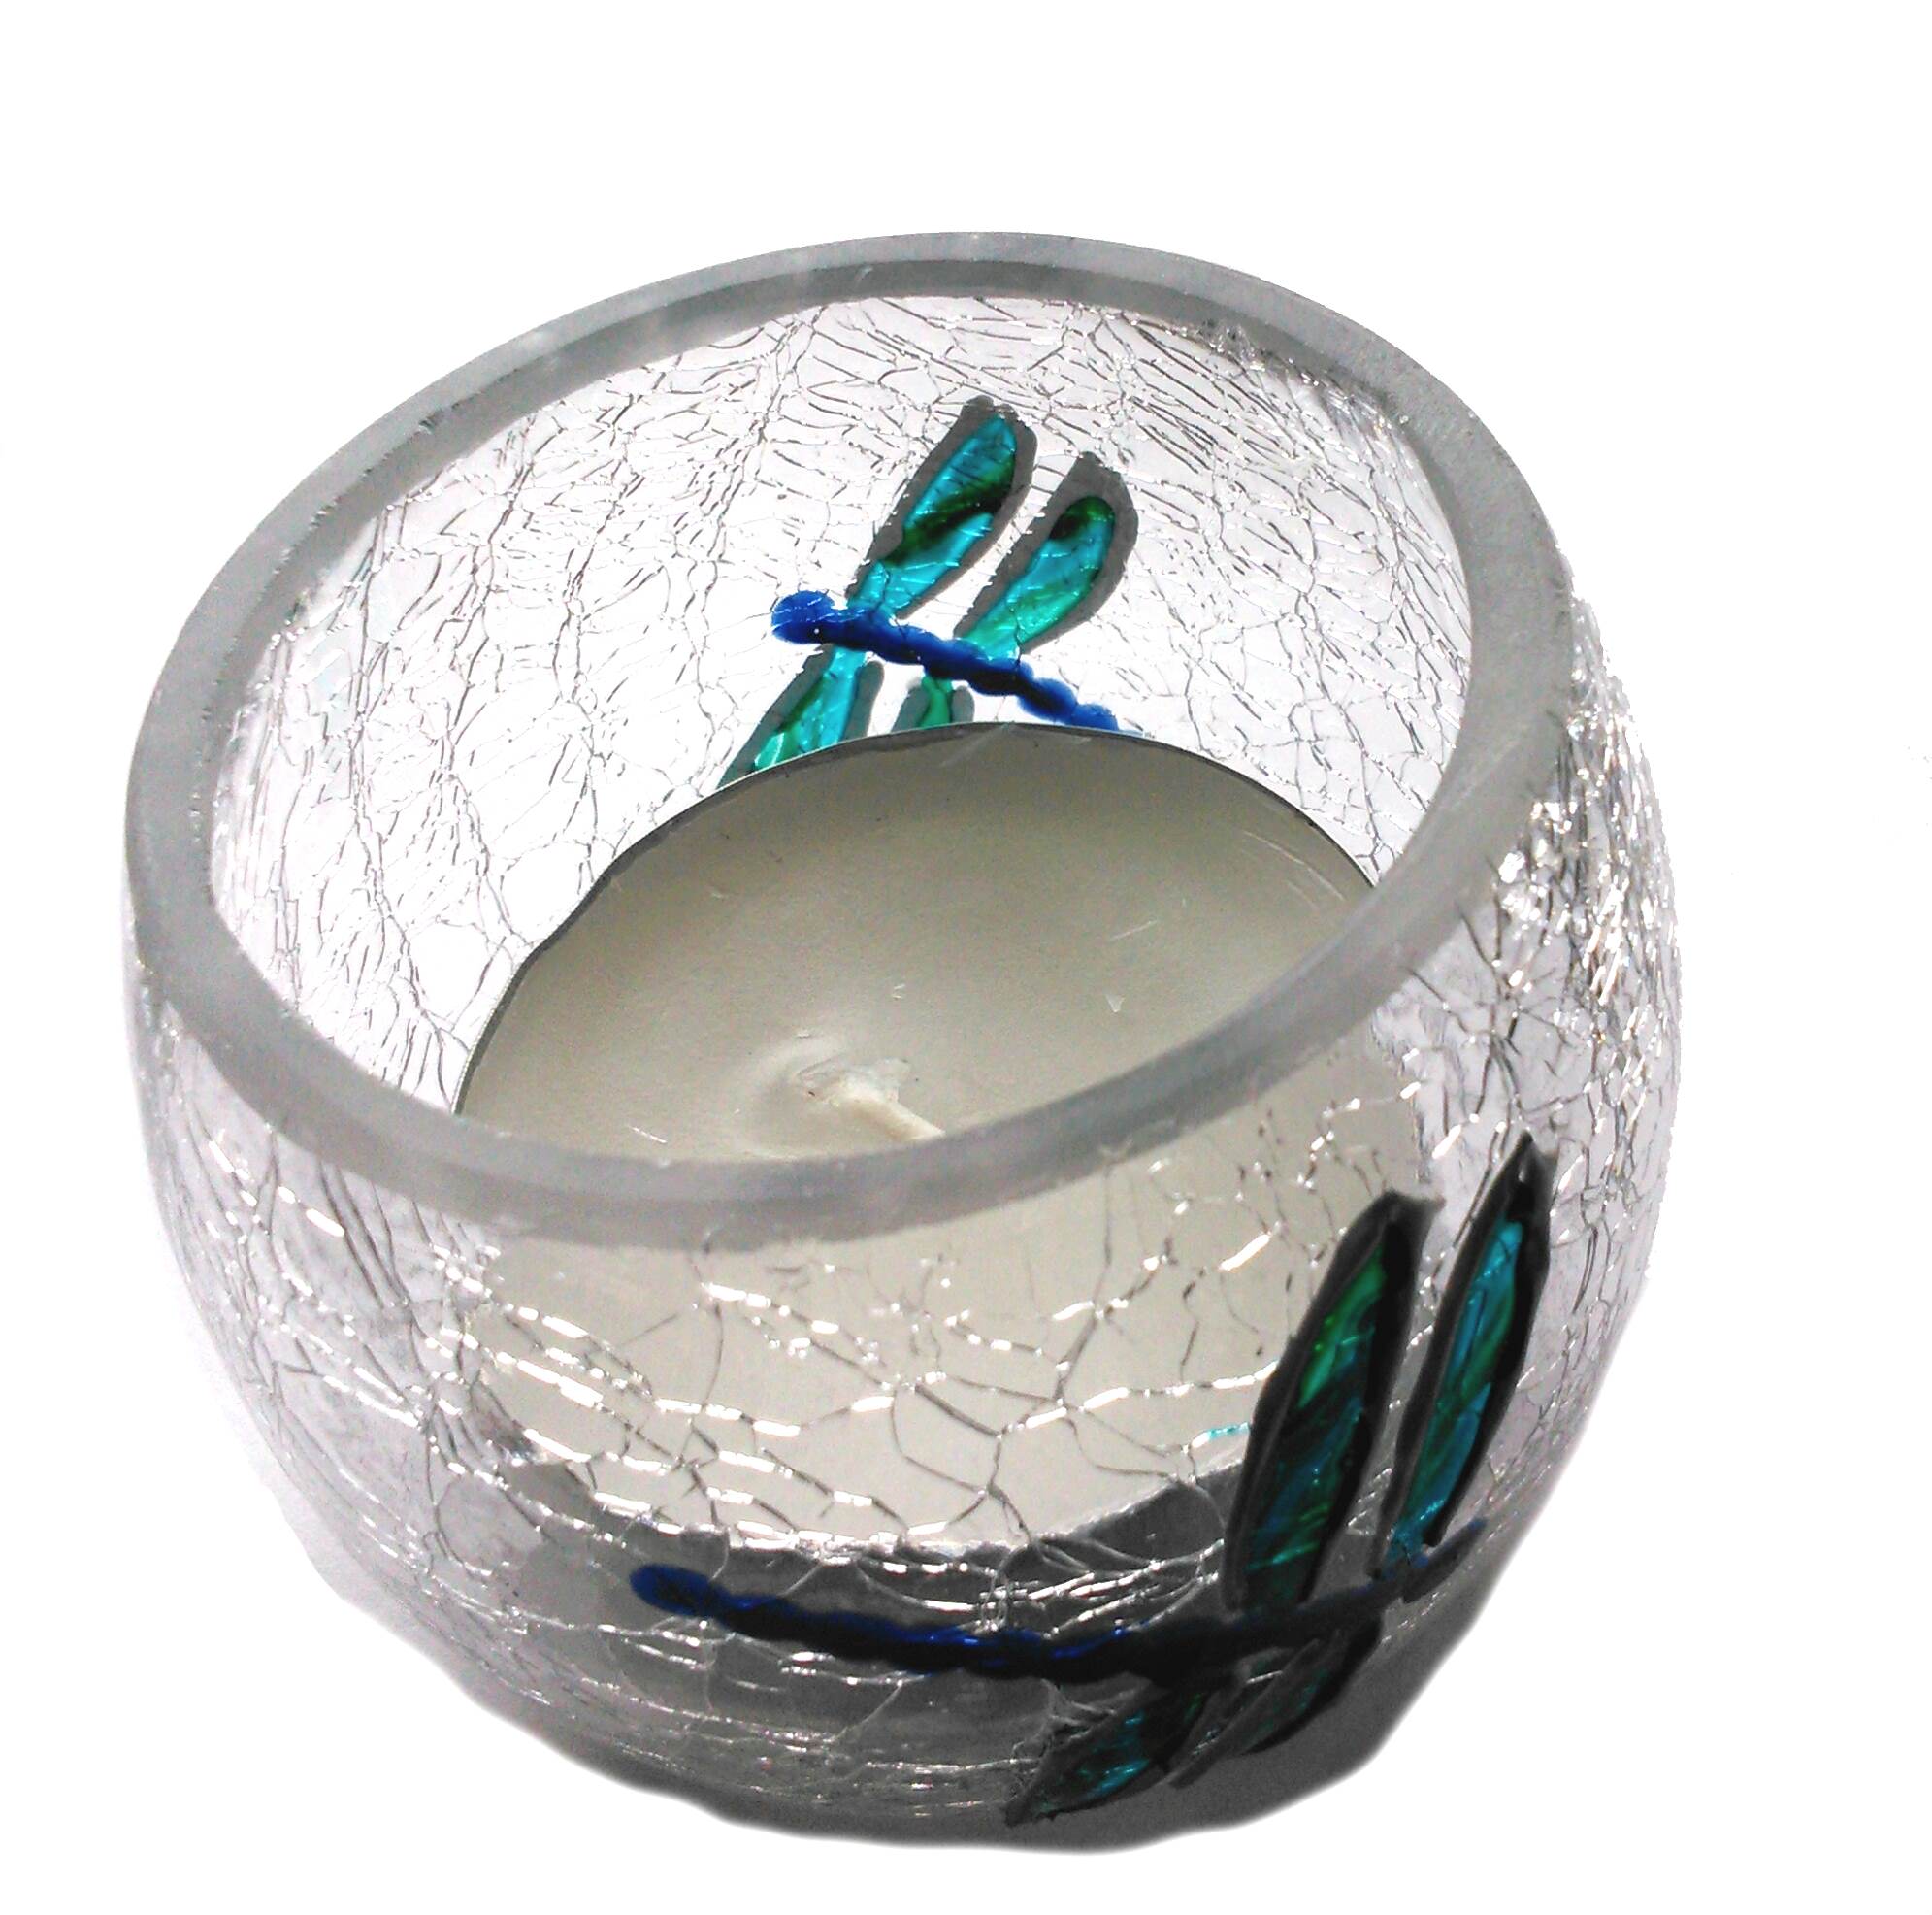 Crackle tealight holder with turquoise dragonfly